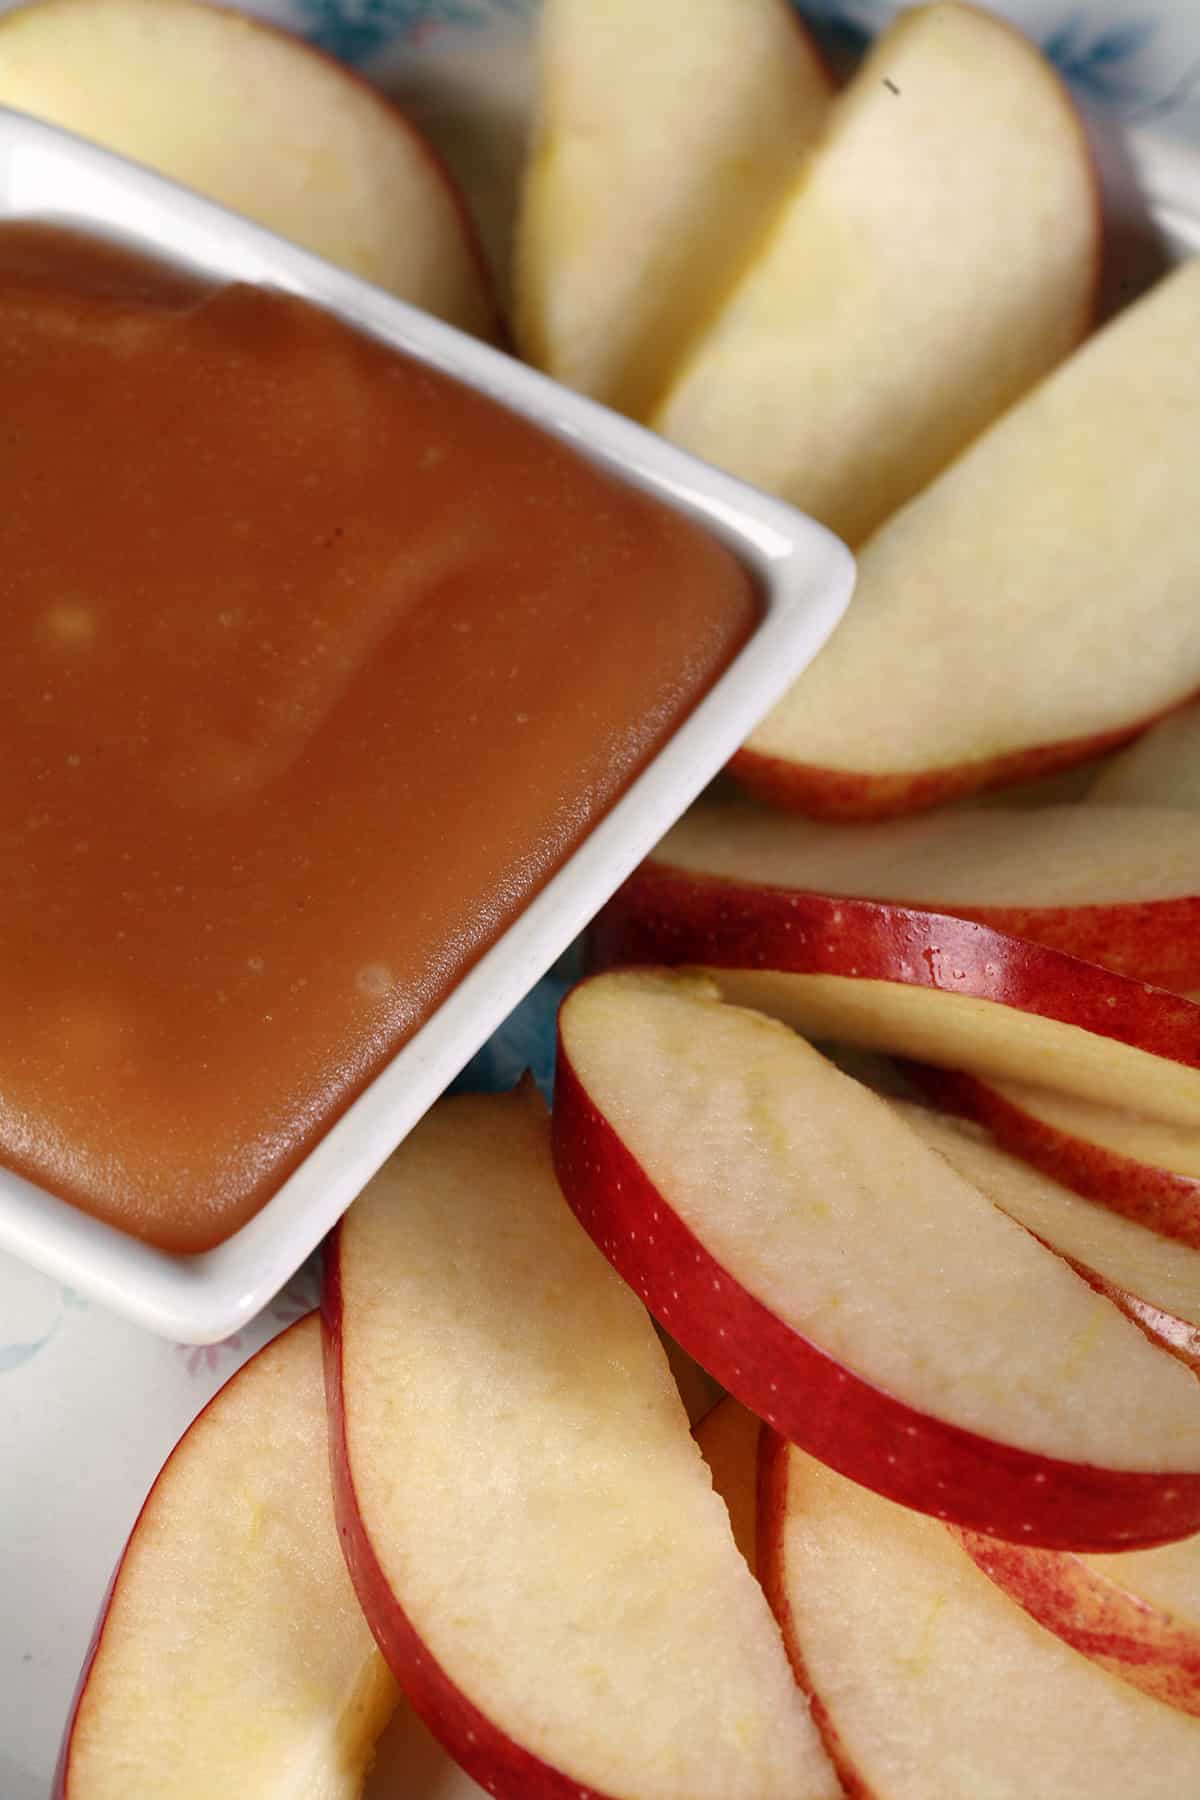 A plate of apple slices surrounding a bowl of maple syrup caramel.